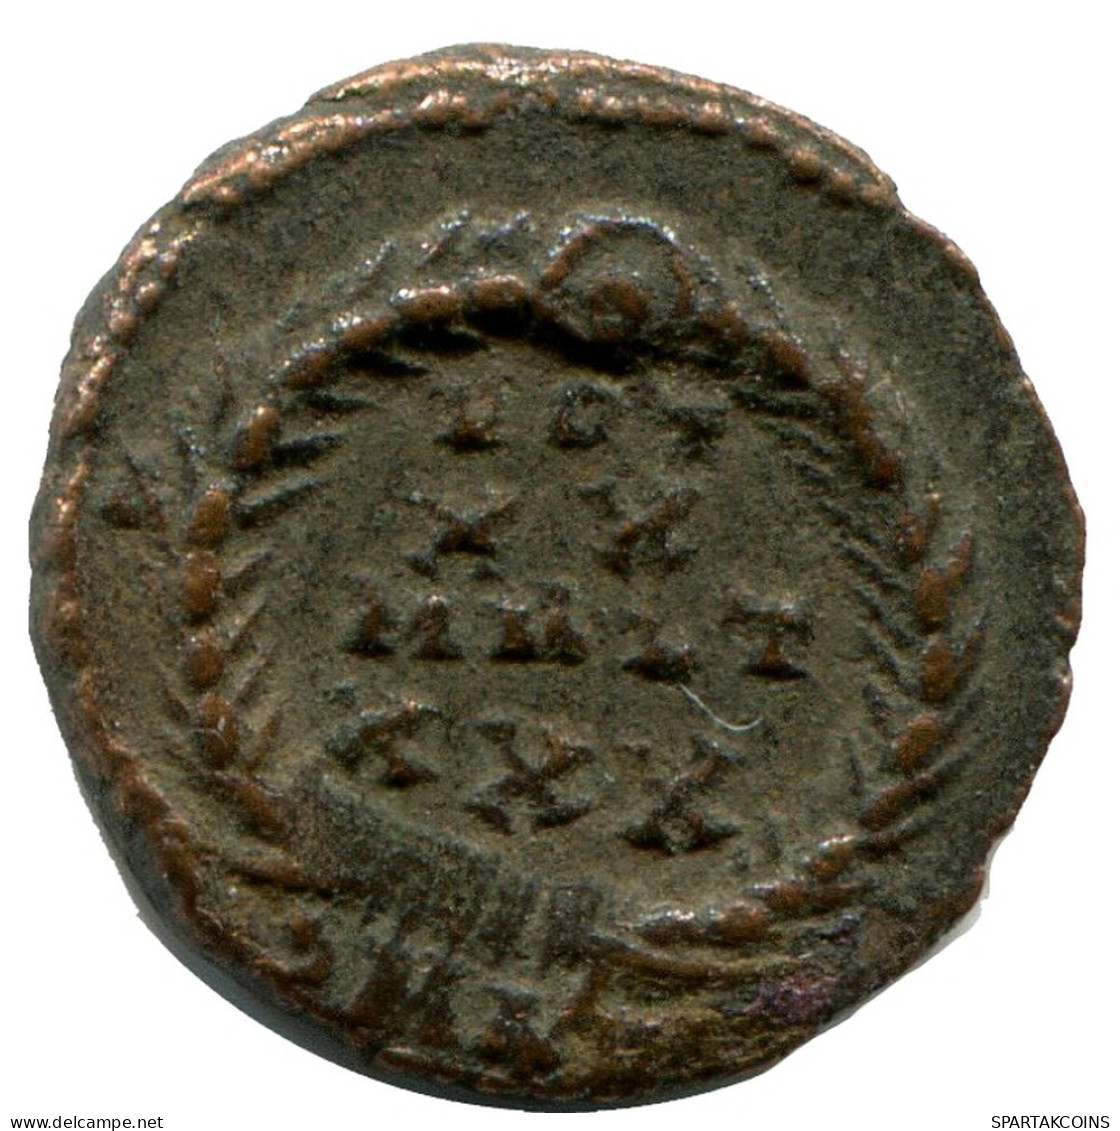 CONSTANTIUS II ALEKSANDRIA FROM THE ROYAL ONTARIO MUSEUM #ANC10497.14.U.A - The Christian Empire (307 AD Tot 363 AD)